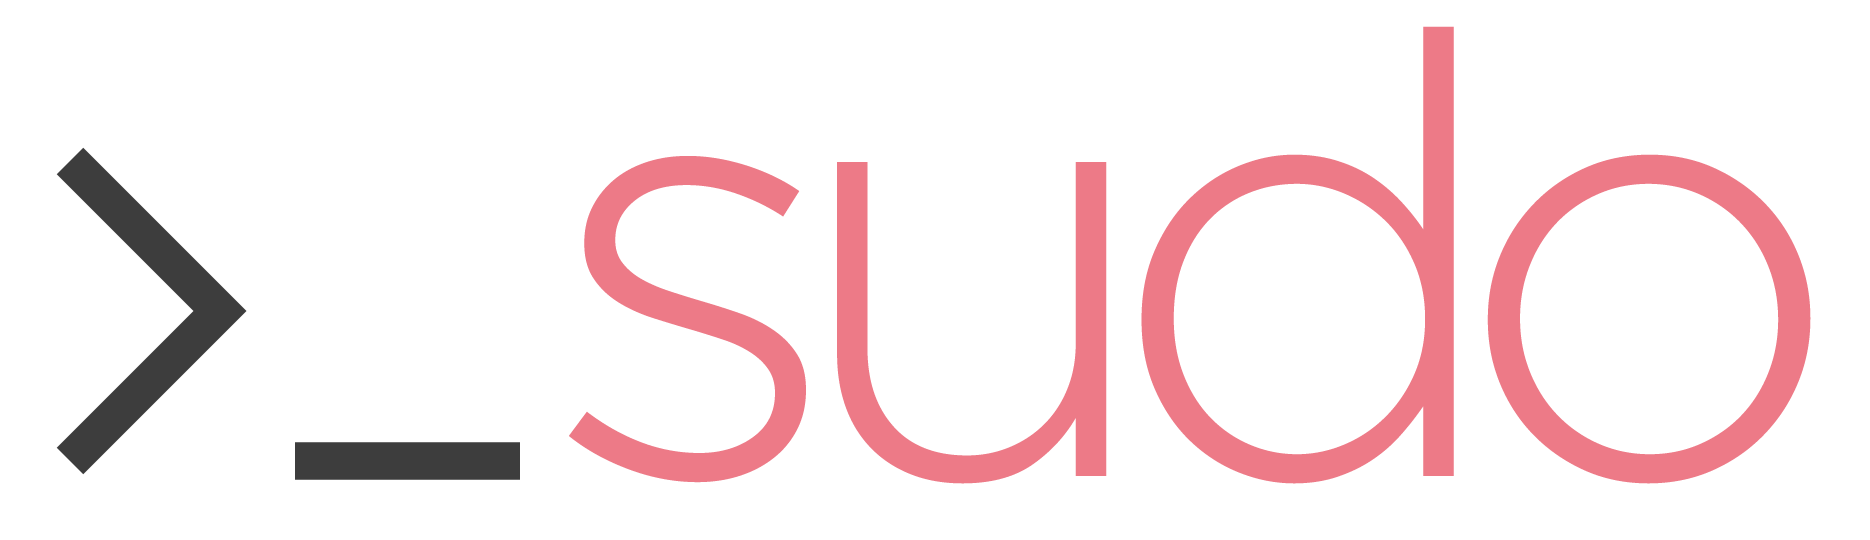 sudo_logo-how-to-add-user-to-sysadmin-group